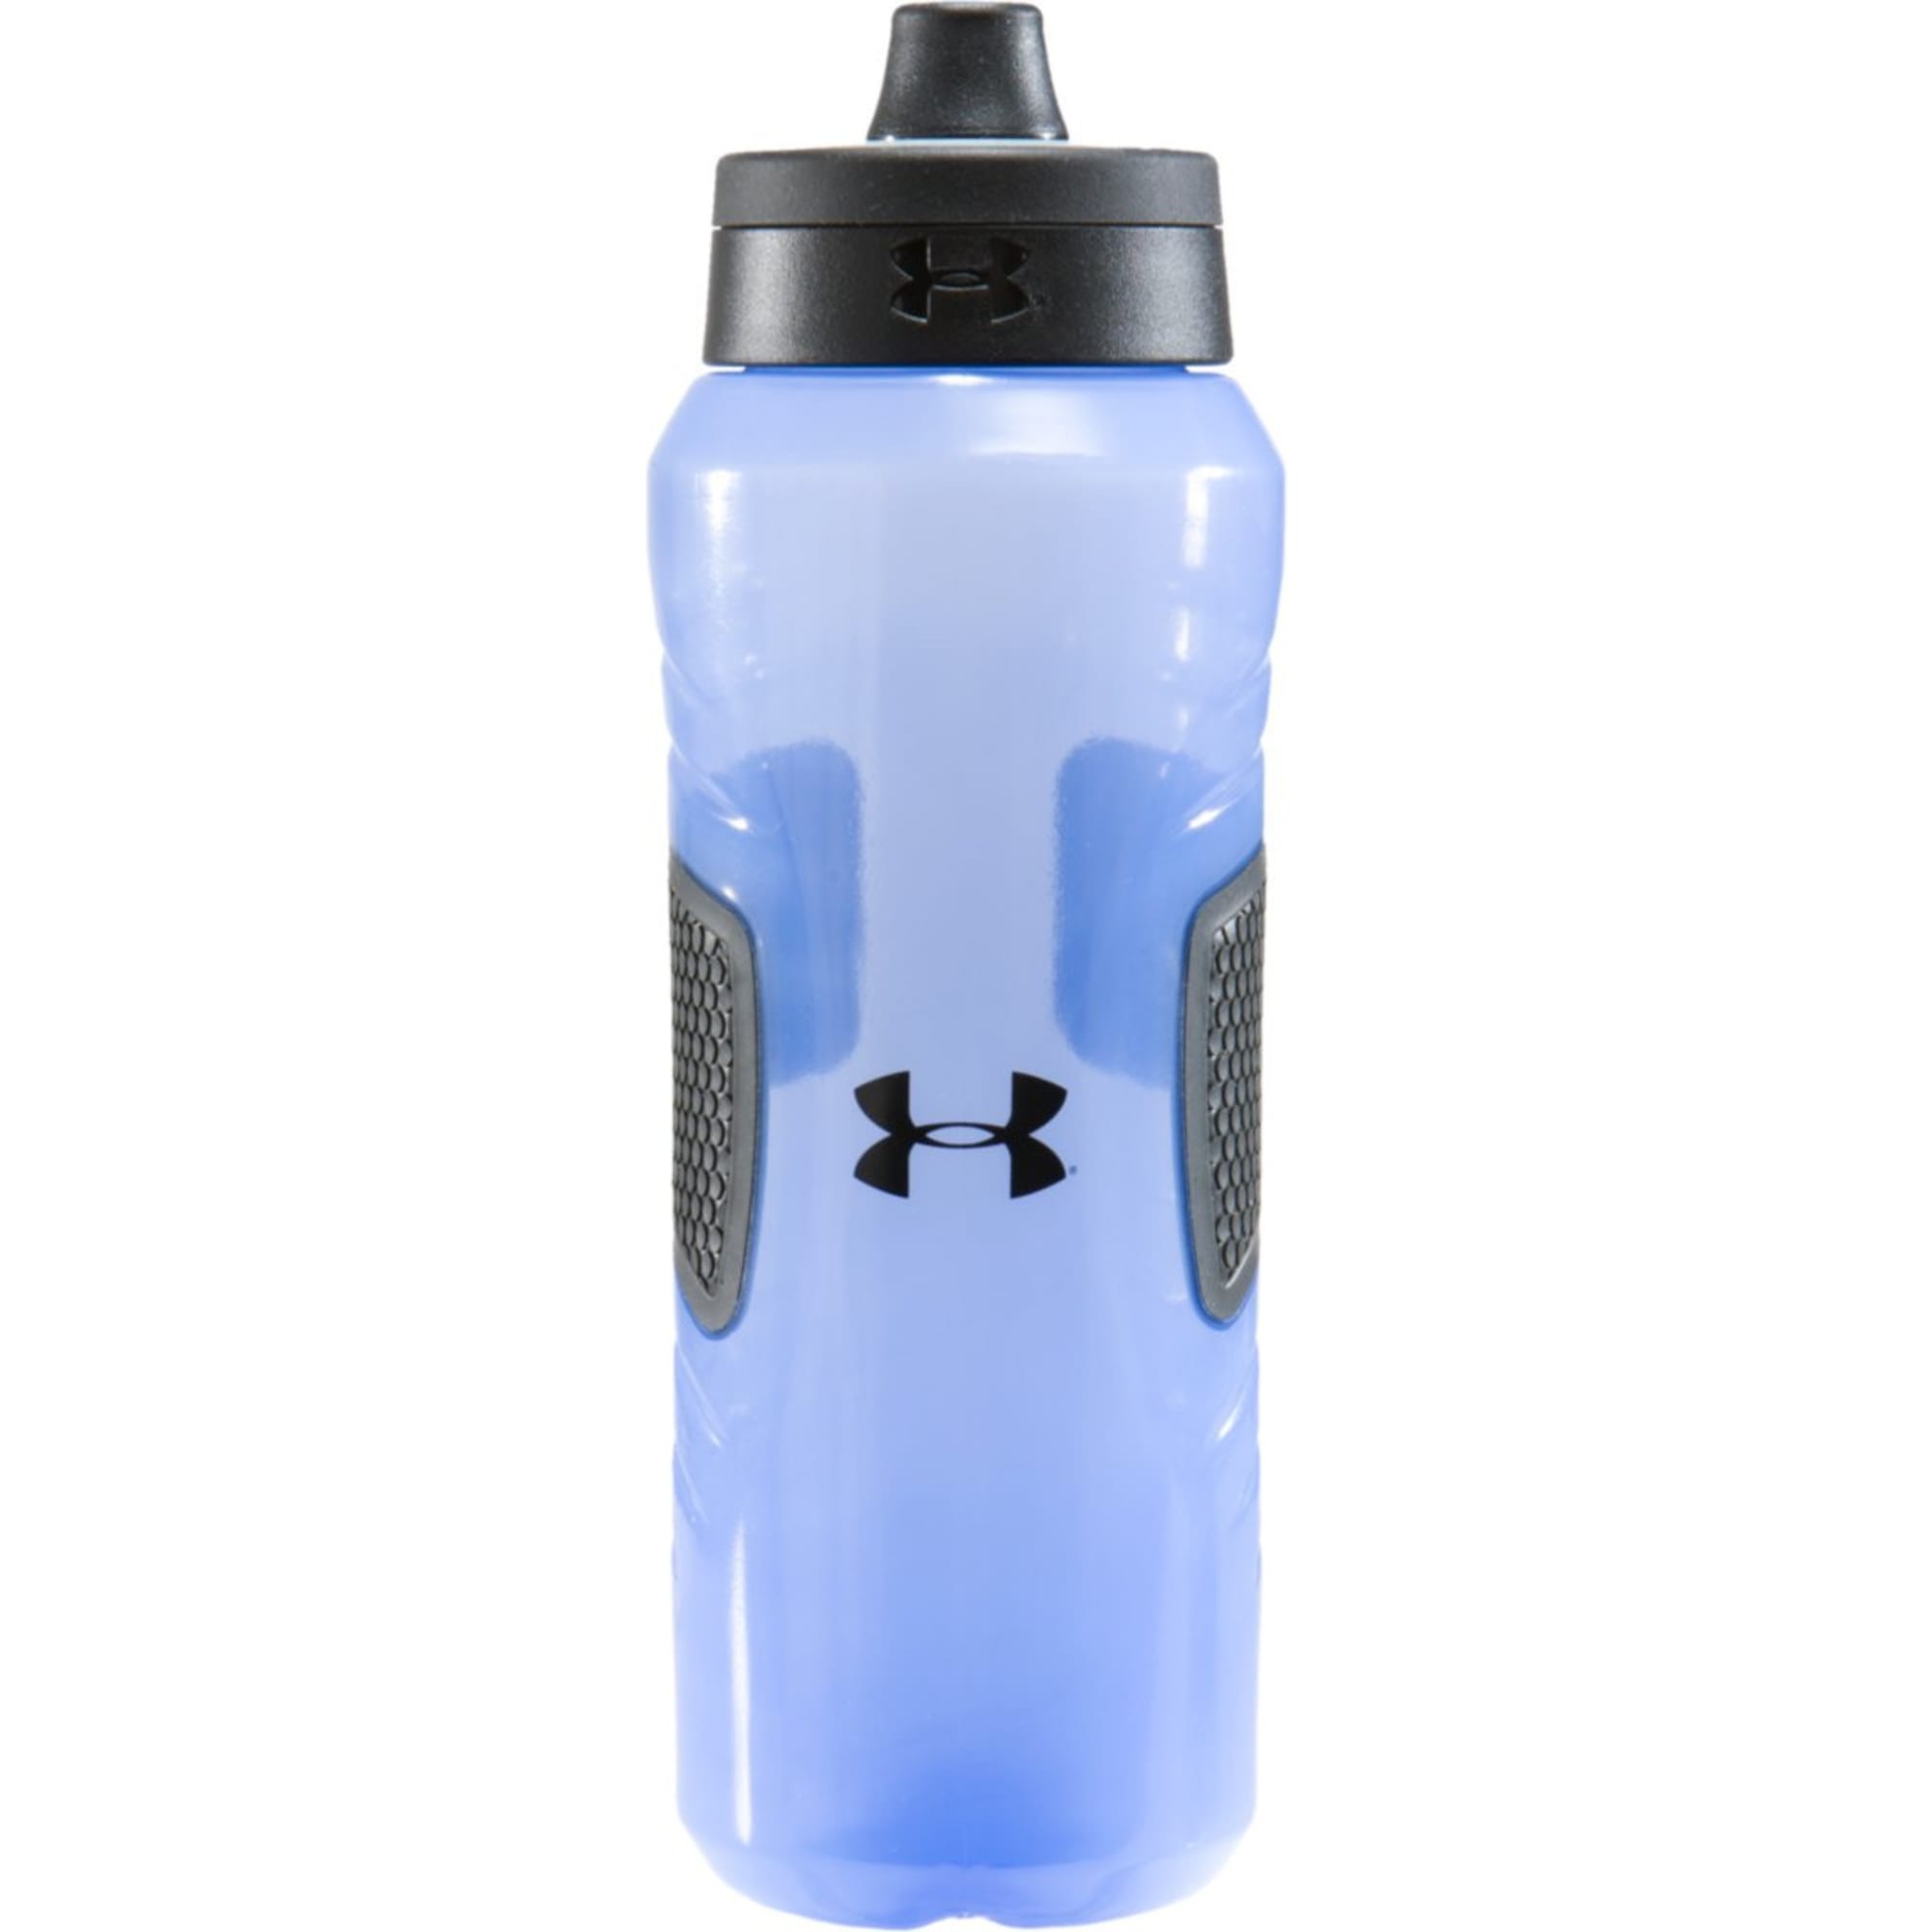 UNDER ARMOUR Squeeze Bottle with Quick Shot Lid - Bob's Stores